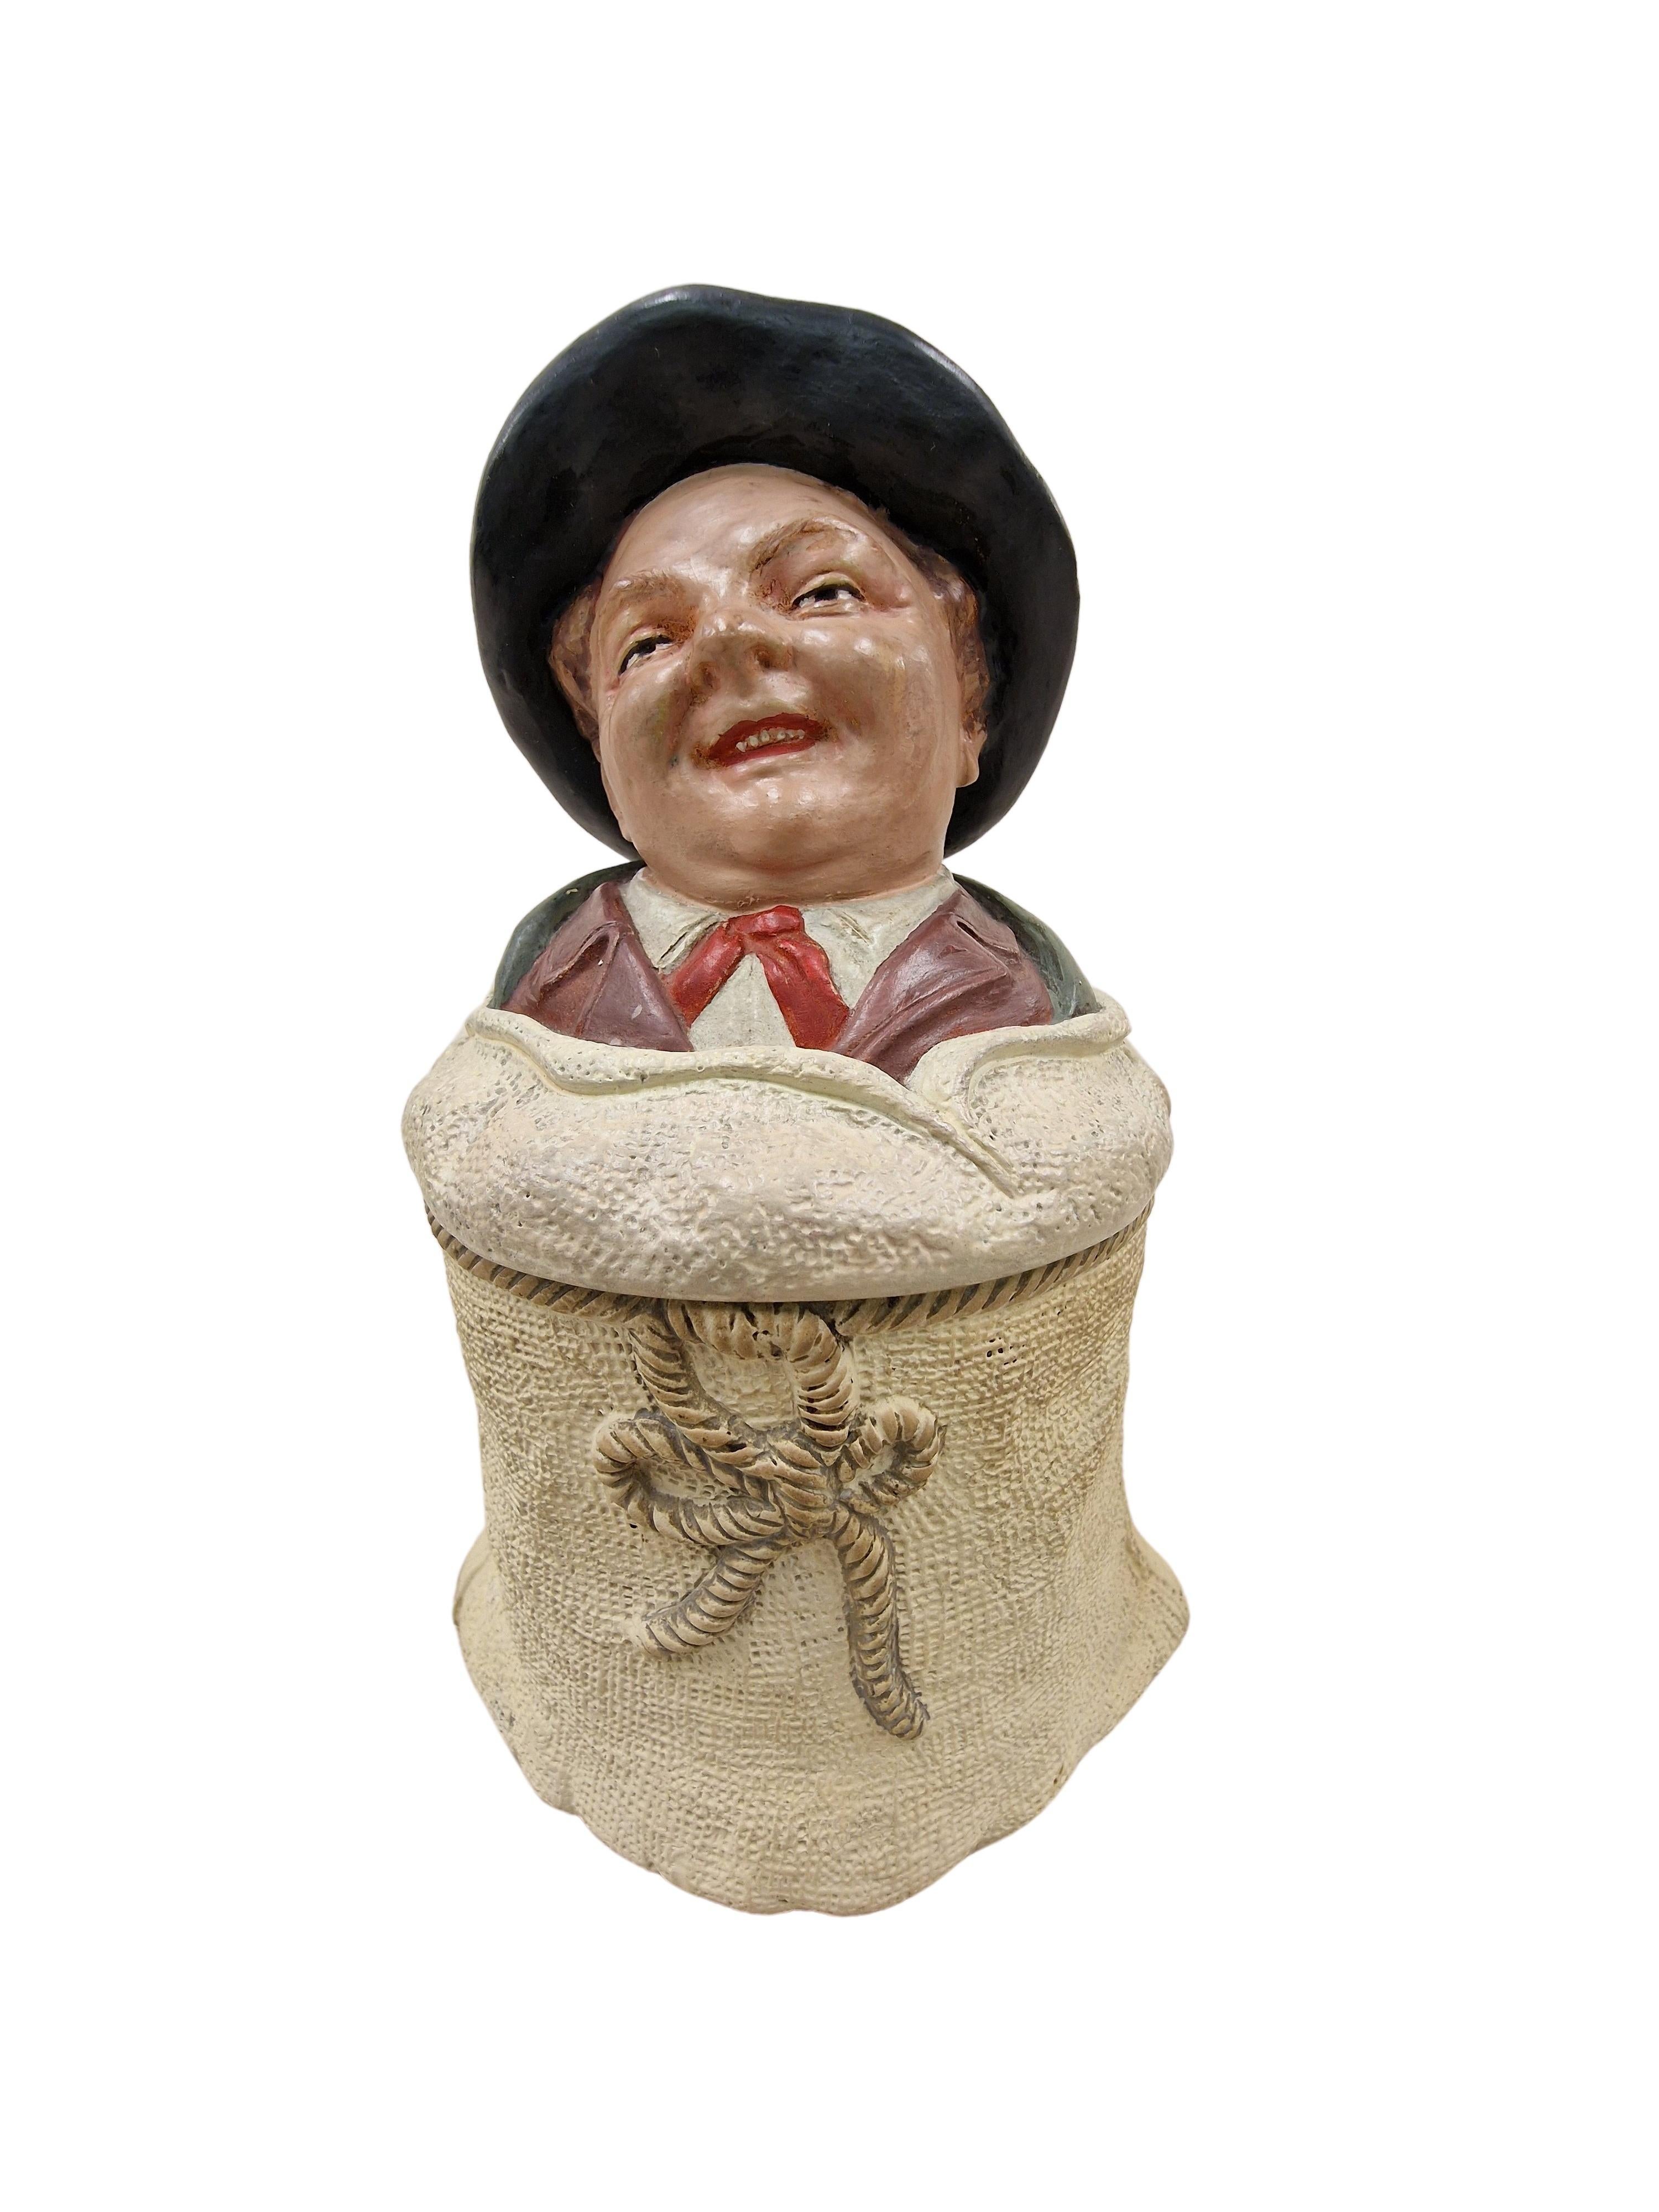 Extraordinary, charming tobacco box, made in the 1910s, an original art nouveau piece, made by wellknown Johann Maresch, Czech Republic. 

The tobacco tin is designed like a linen bag, tied with a rope. Above - on the lid, is a laughing man, it